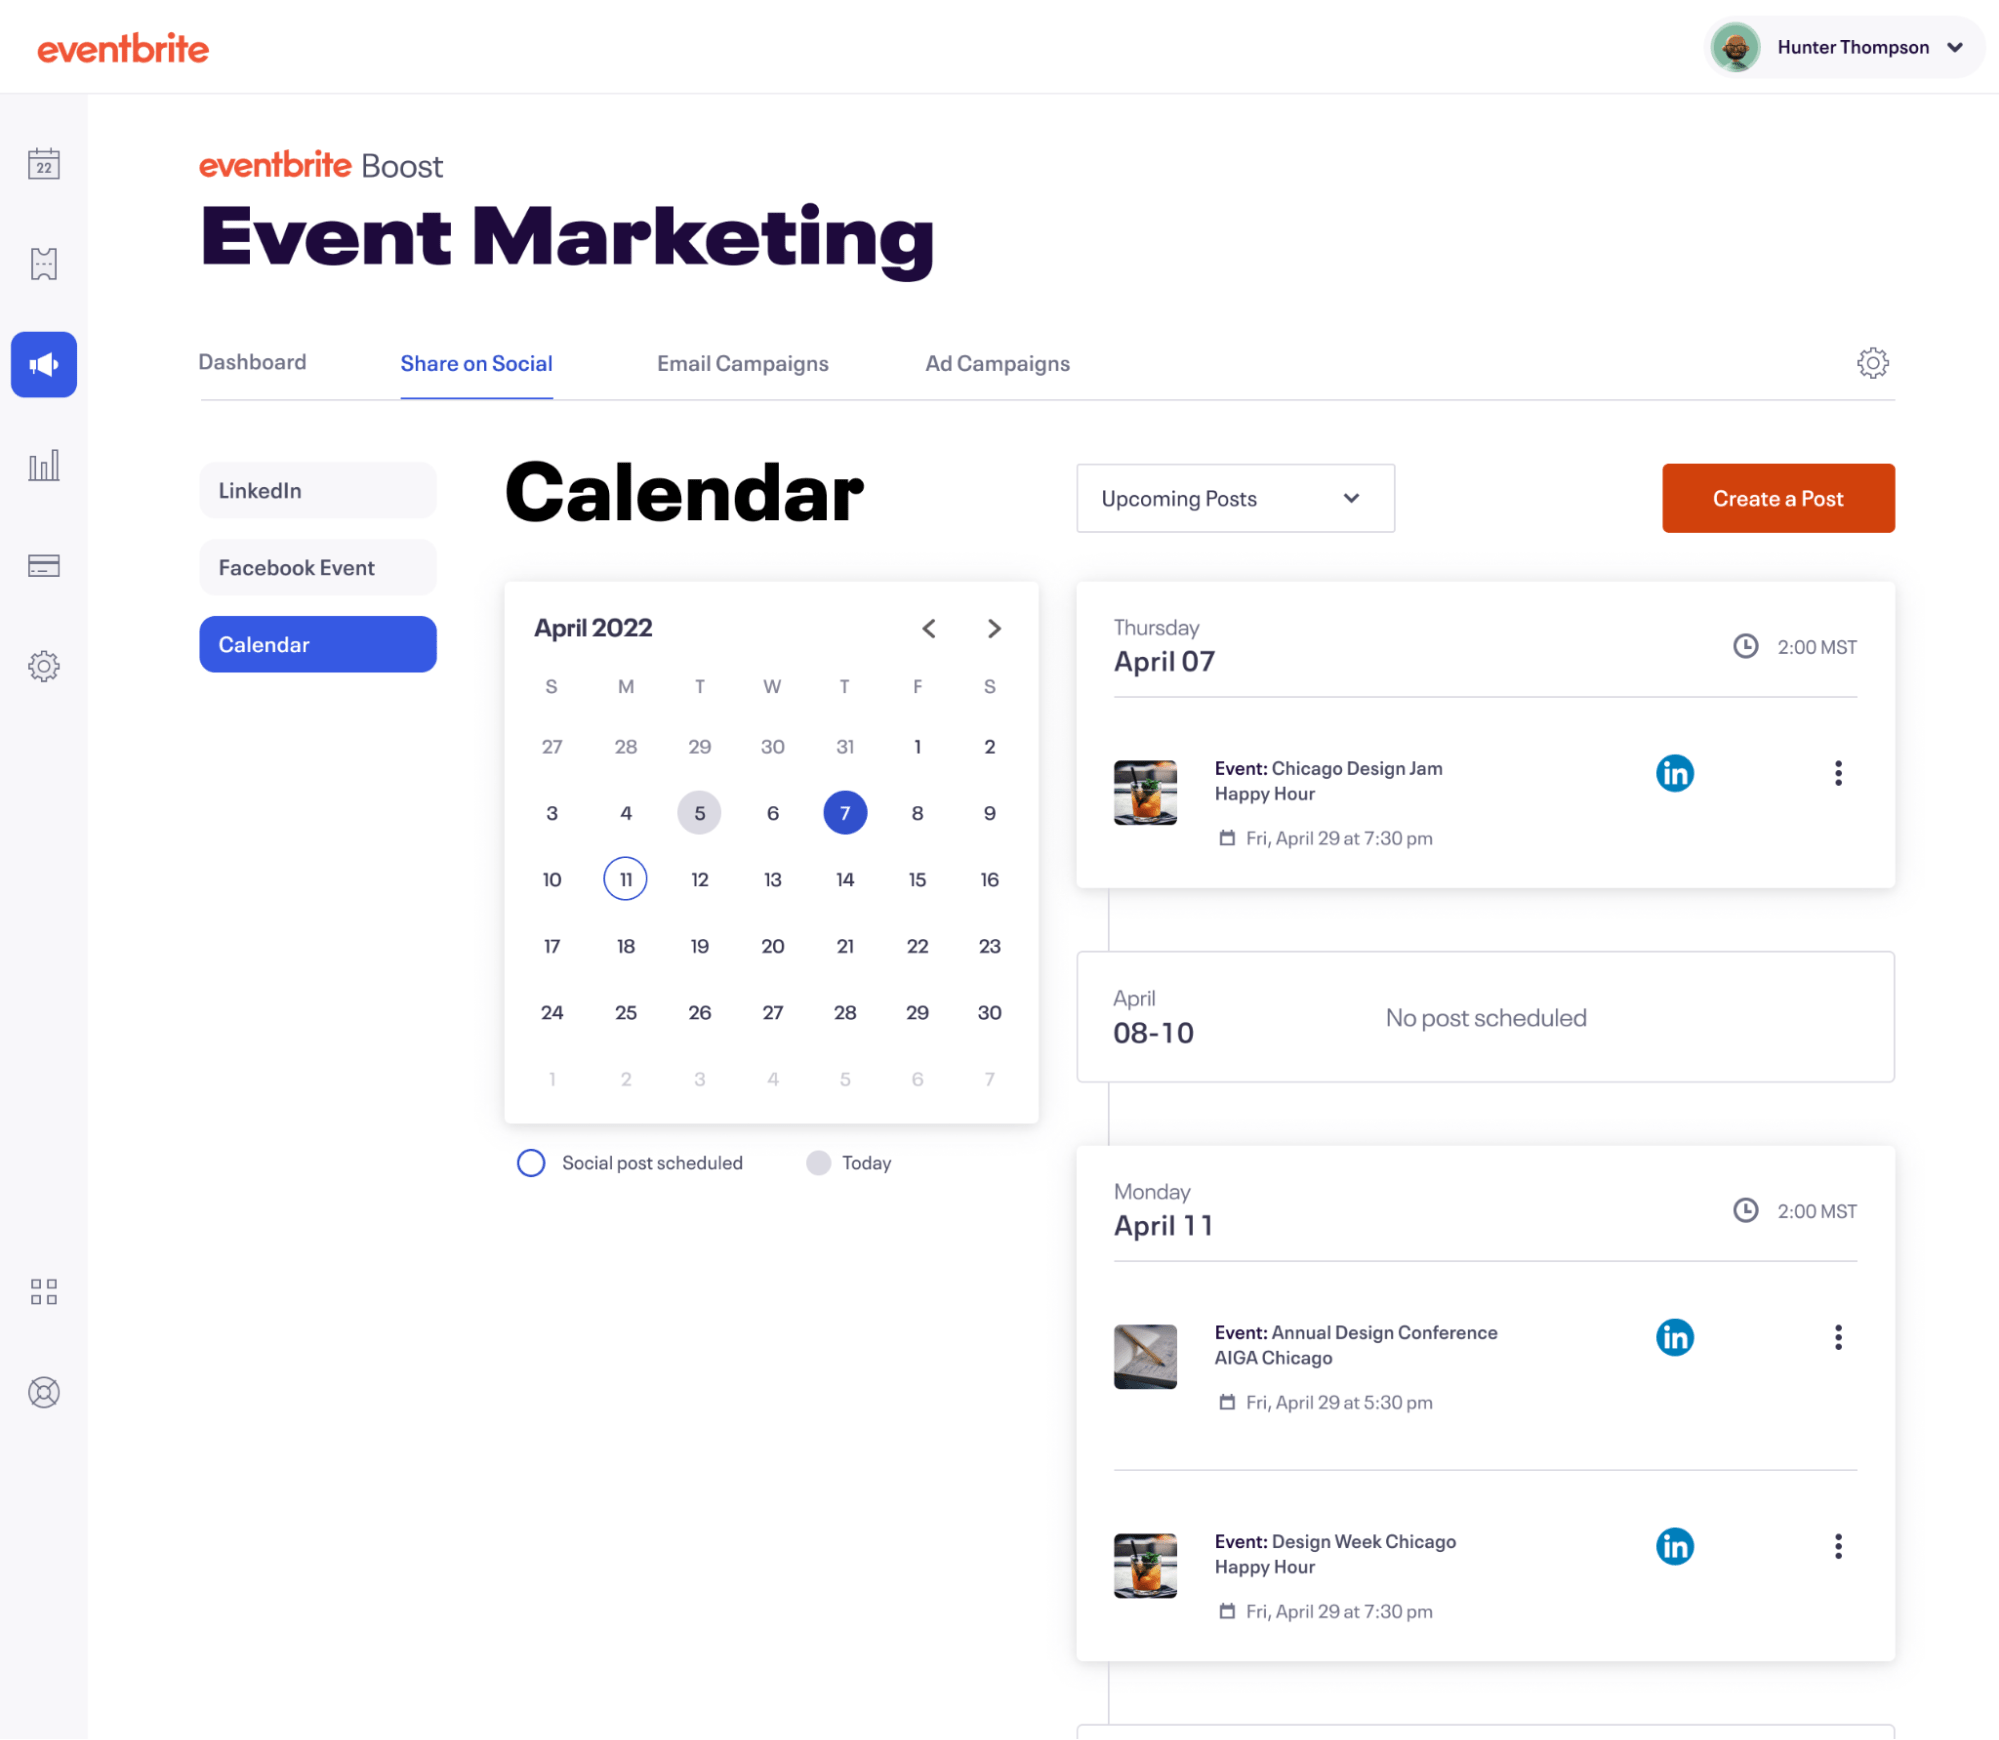 Share to LinkedIn calendar view makes for easy planning